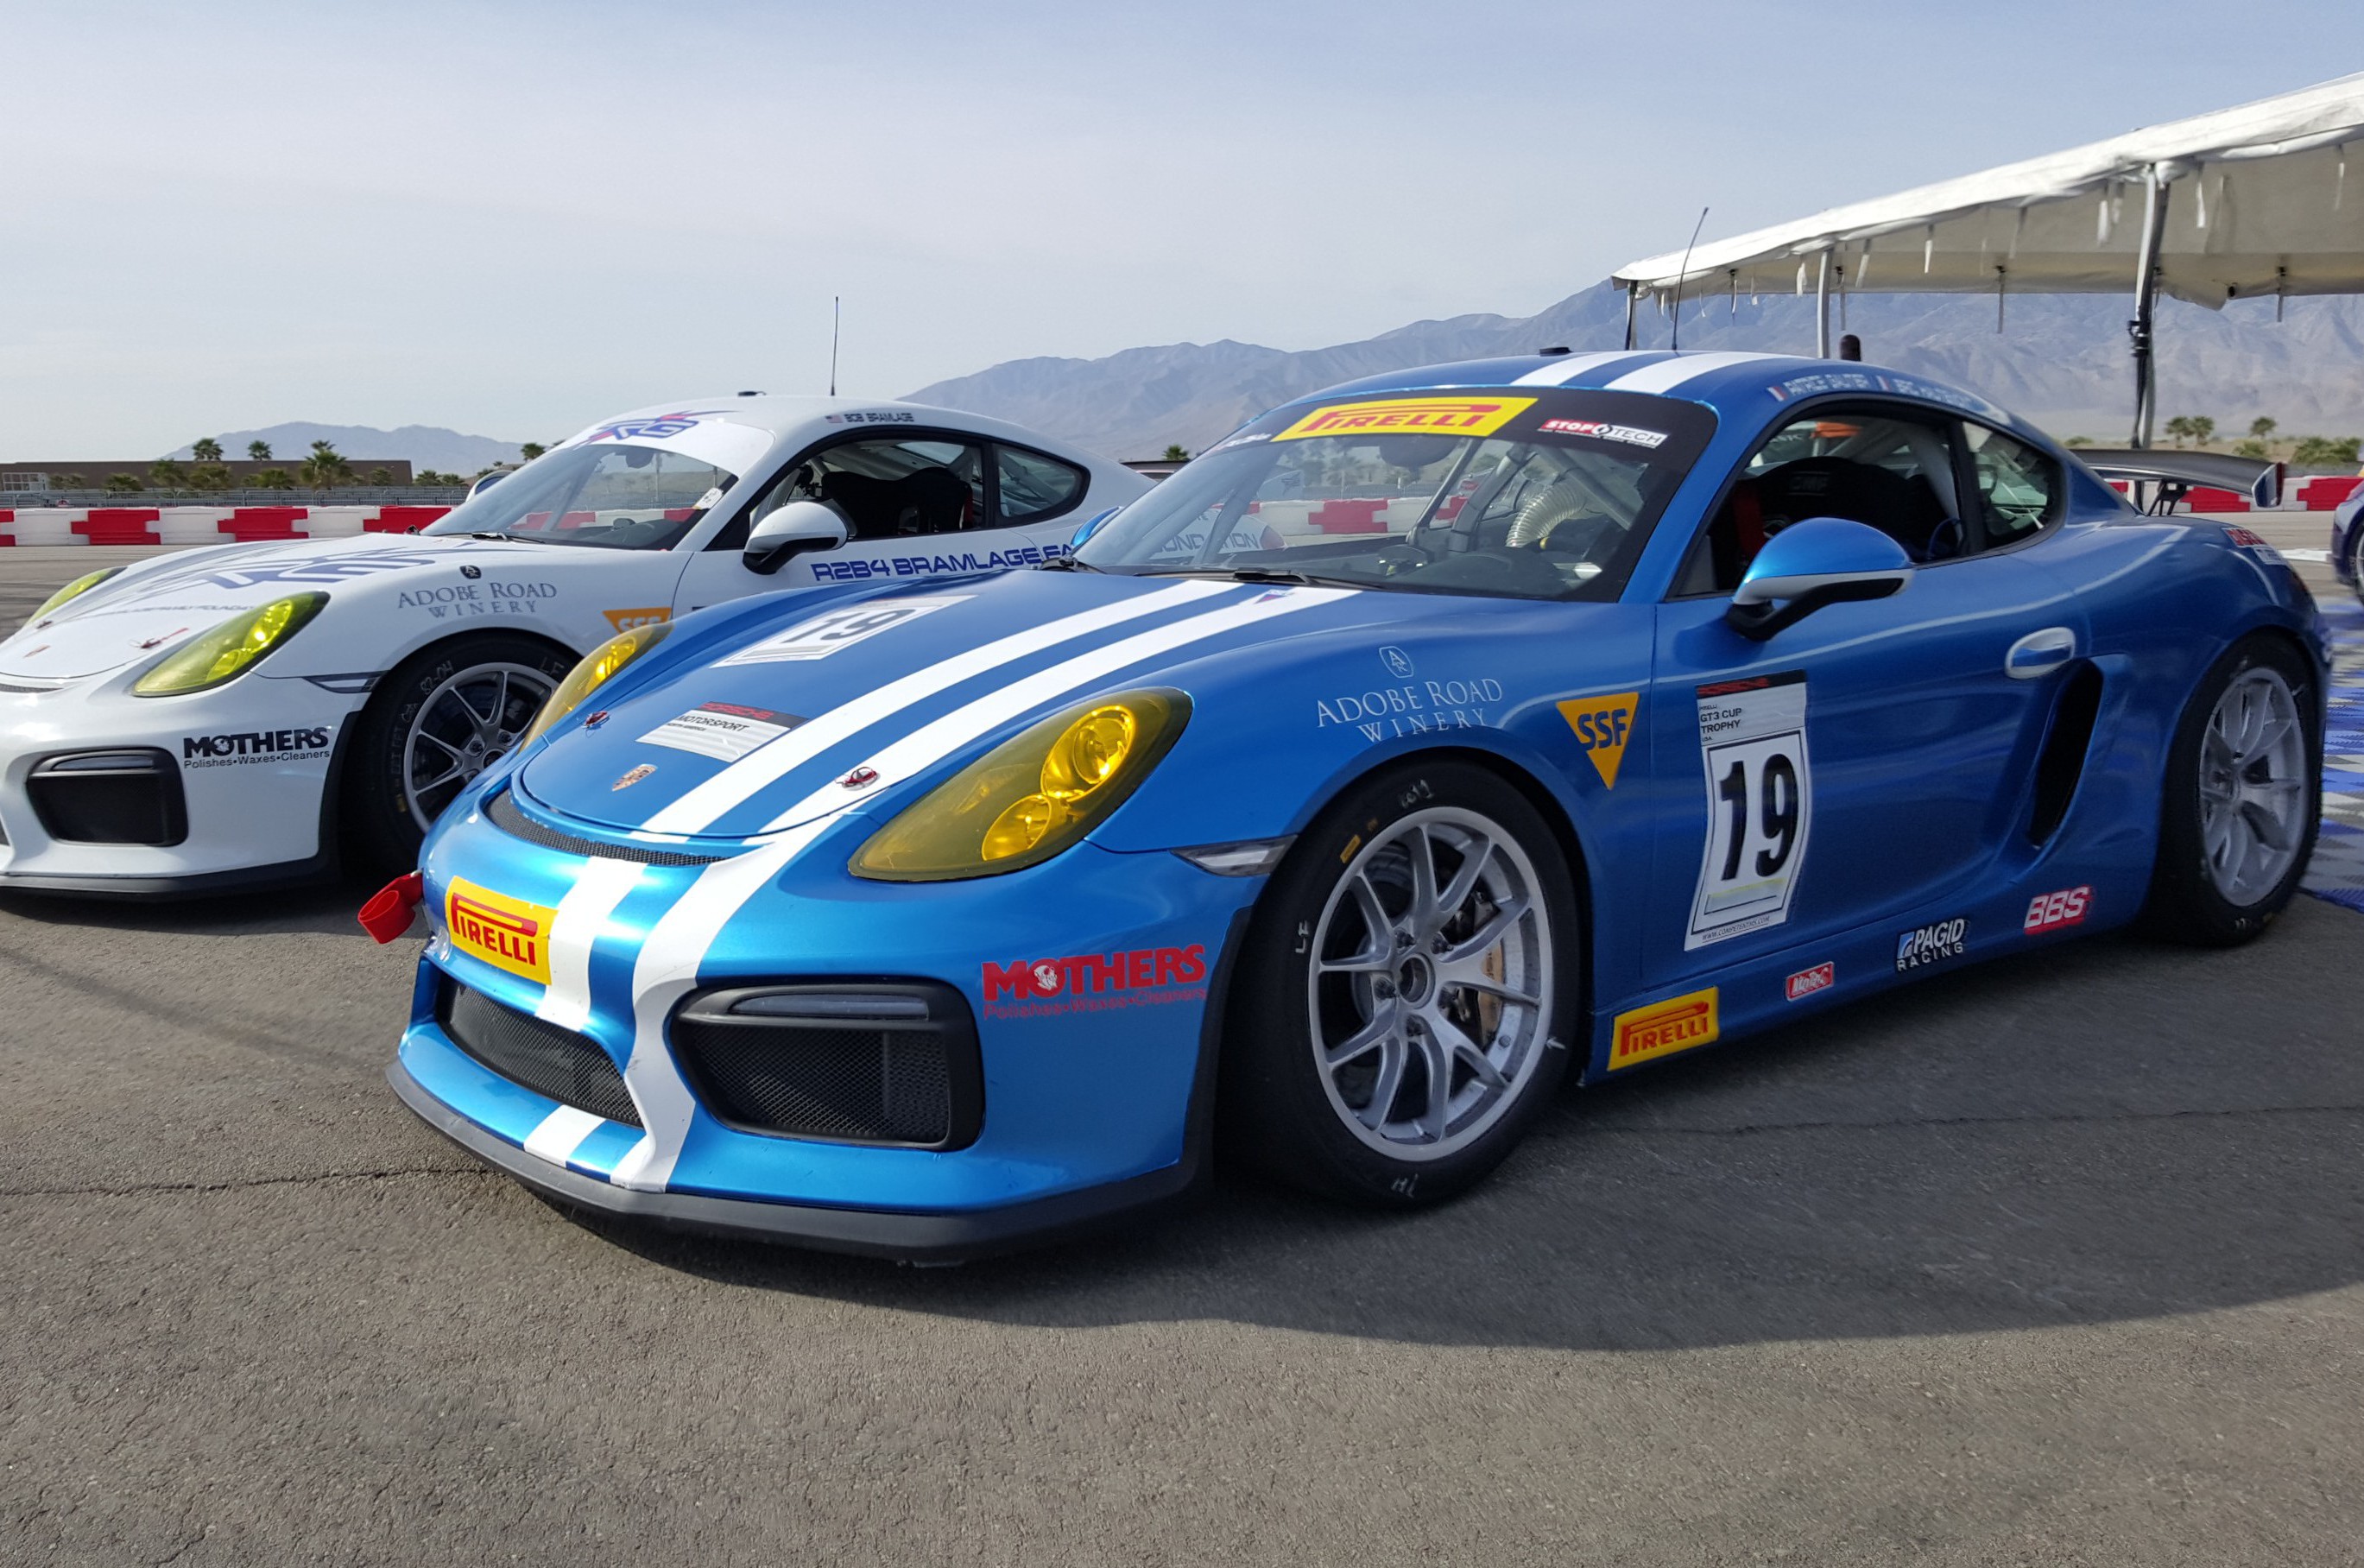 The Racer's Group Plans on Another Podium at the Pirelli GT3 Cup Trophy USA - Thermal